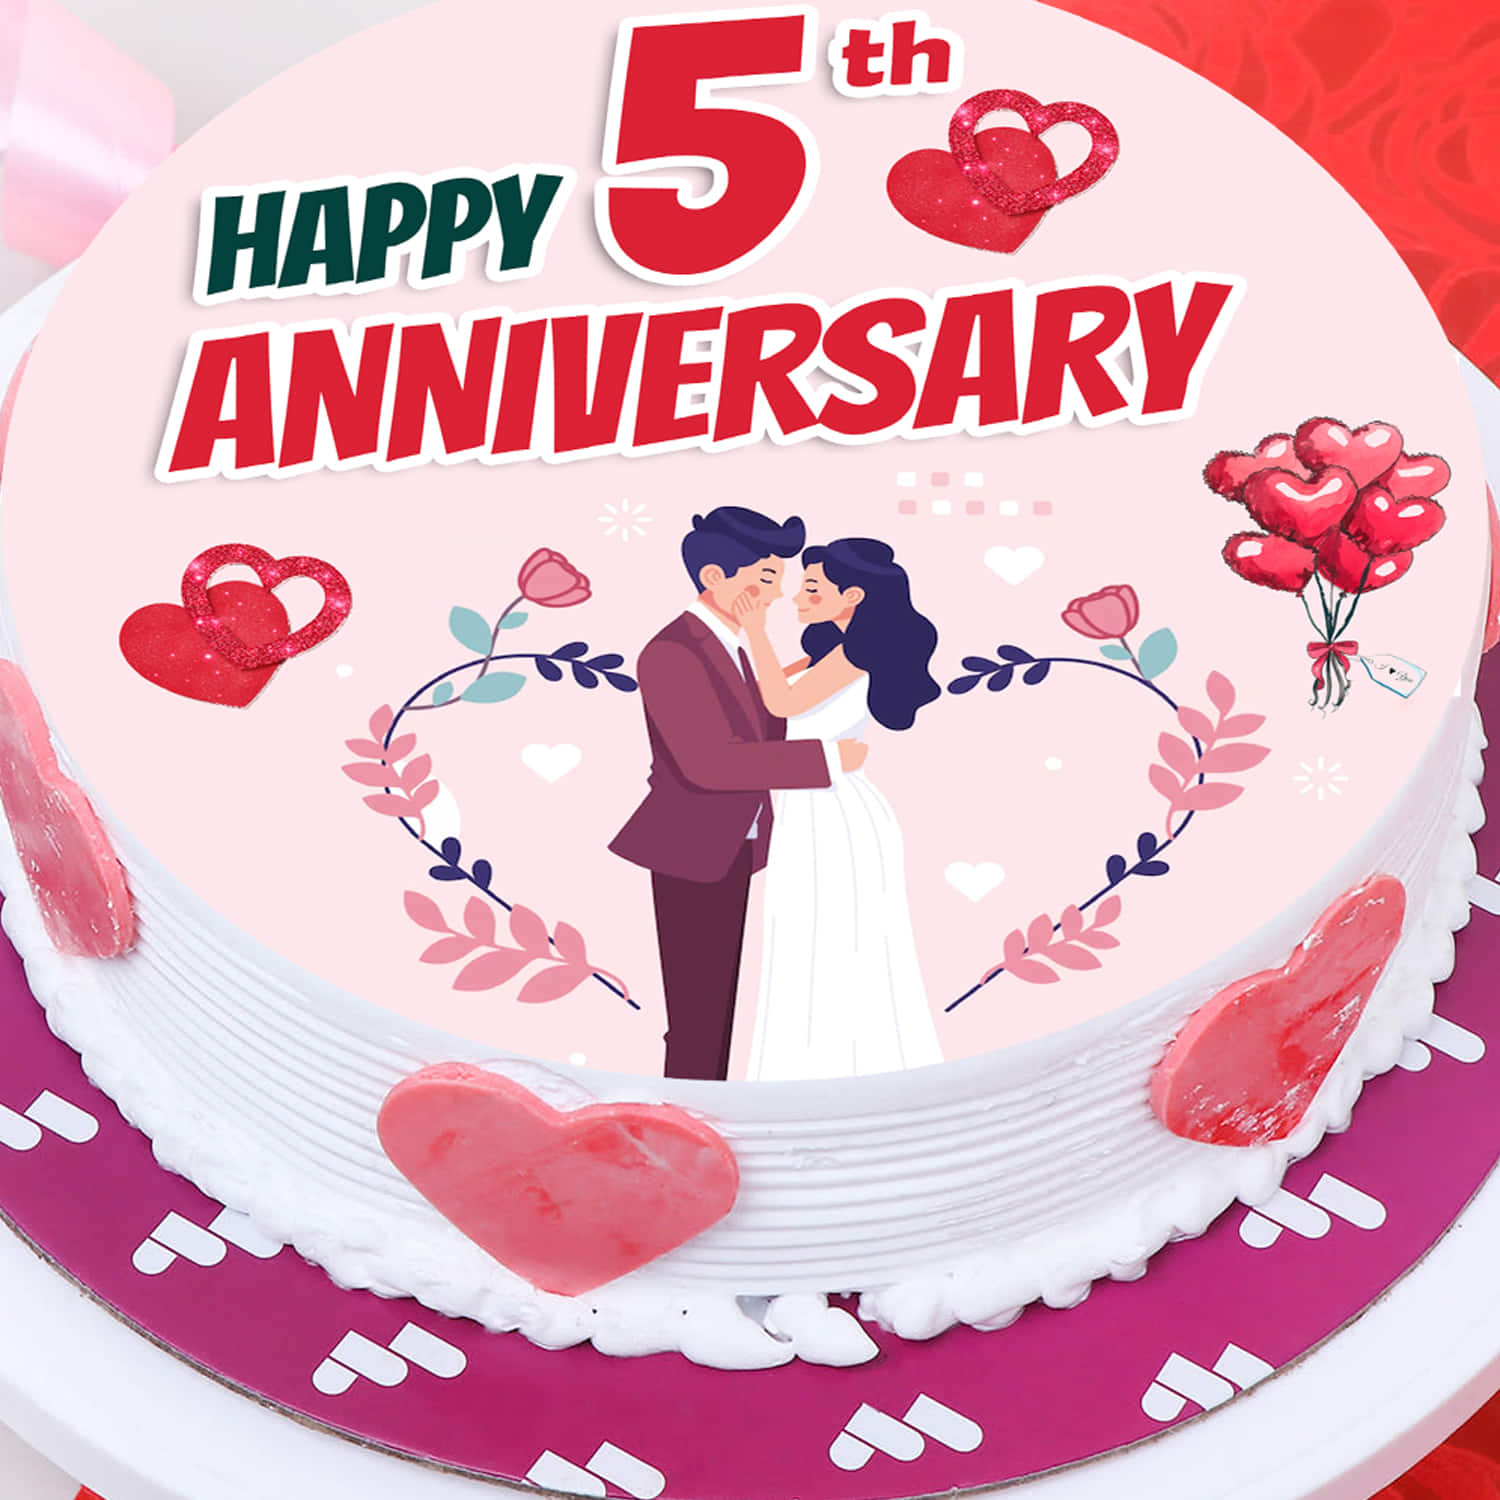 9 Happy Wedding Anniversary Cake Images in White for Pure Elegance | Marriage  anniversary cake, Happy anniversary cakes, Happy marriage anniversary cake